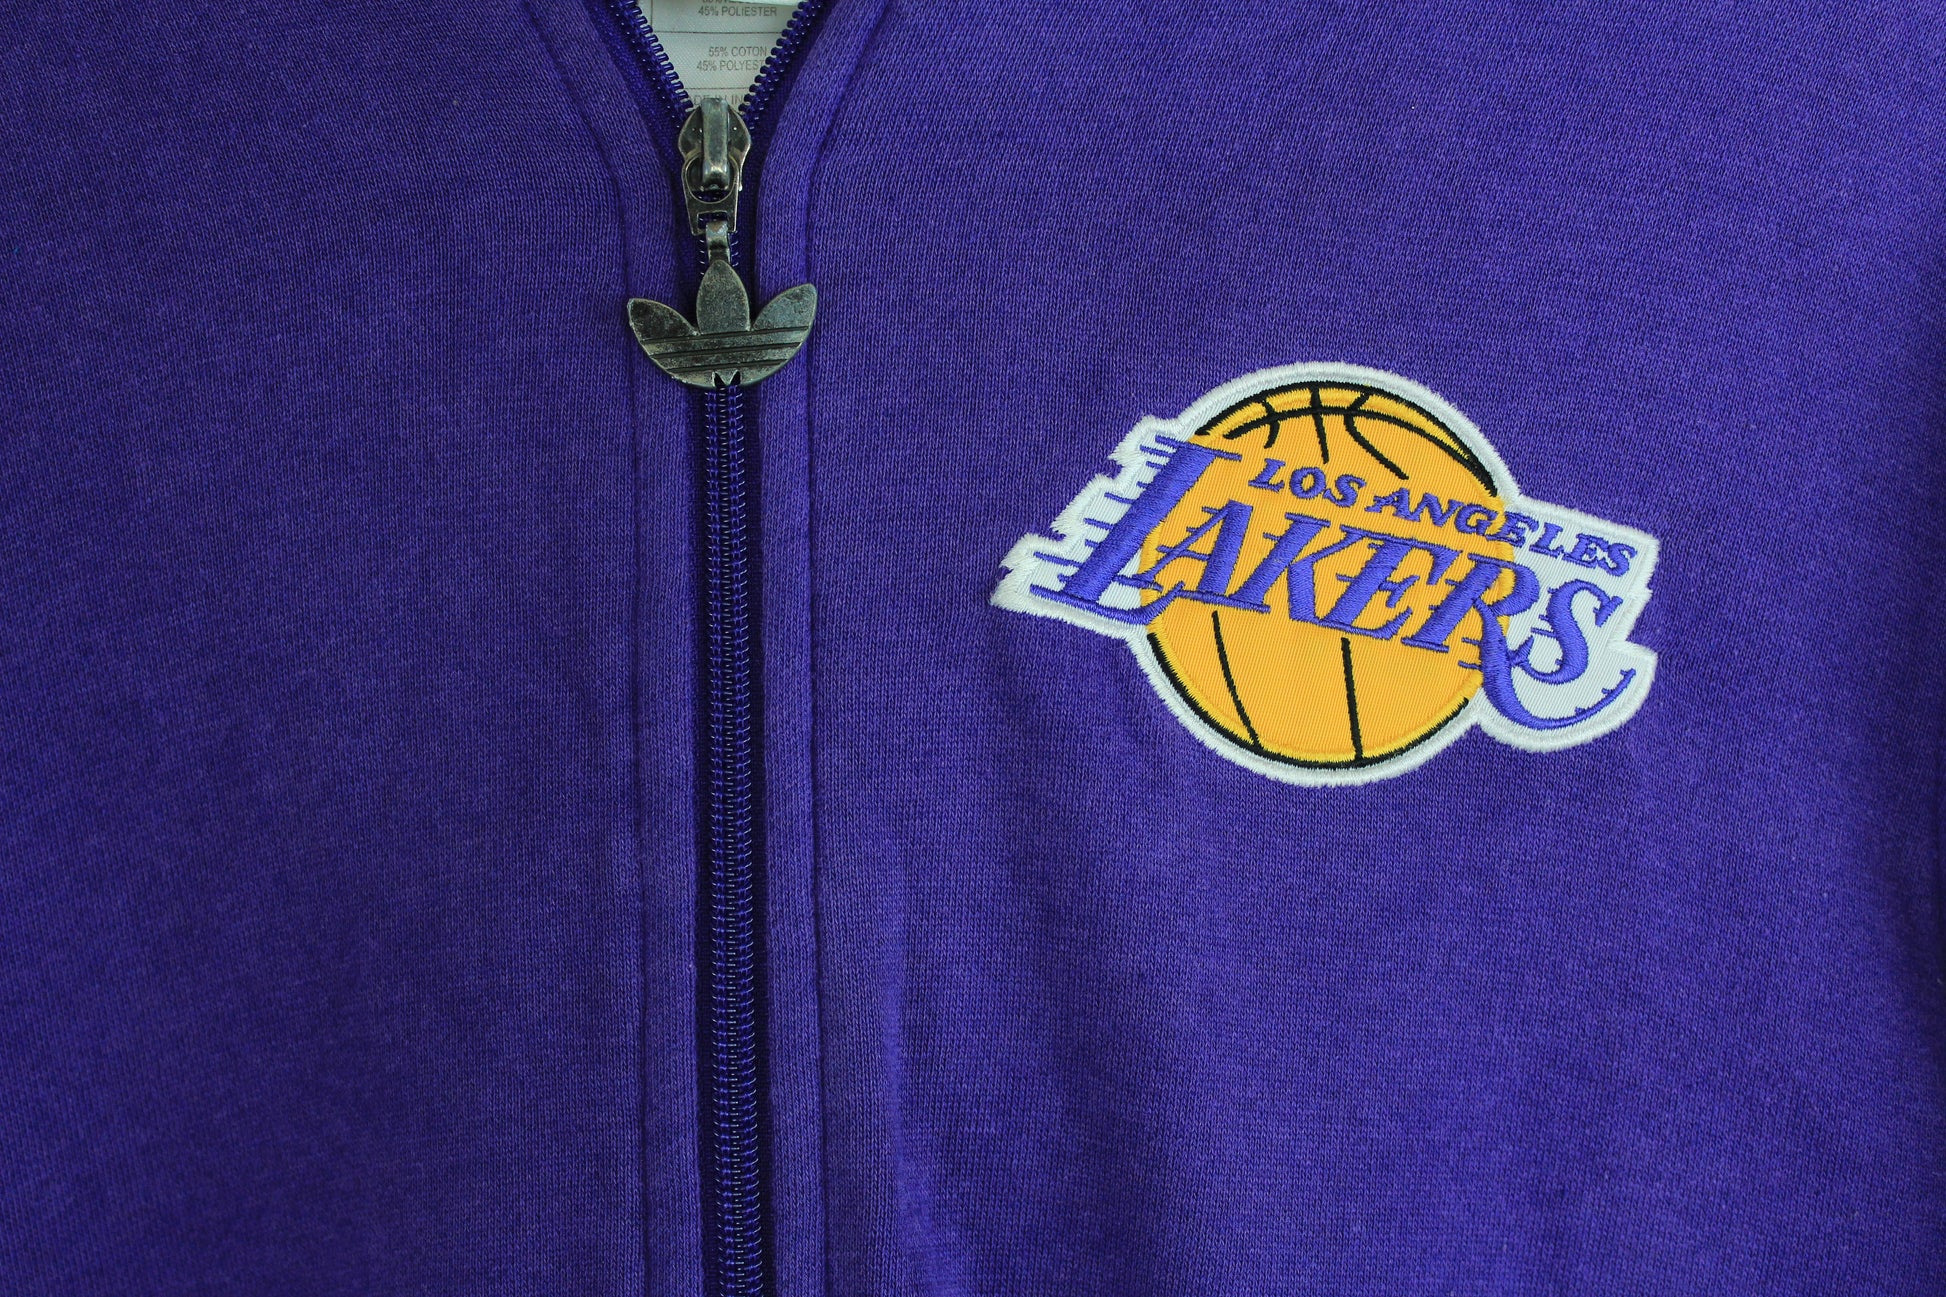 Rare Vintage Adidas L.A. Lakers 3-peat Hoodie - Small (Large) – Nostalcart  Premium Thrifting